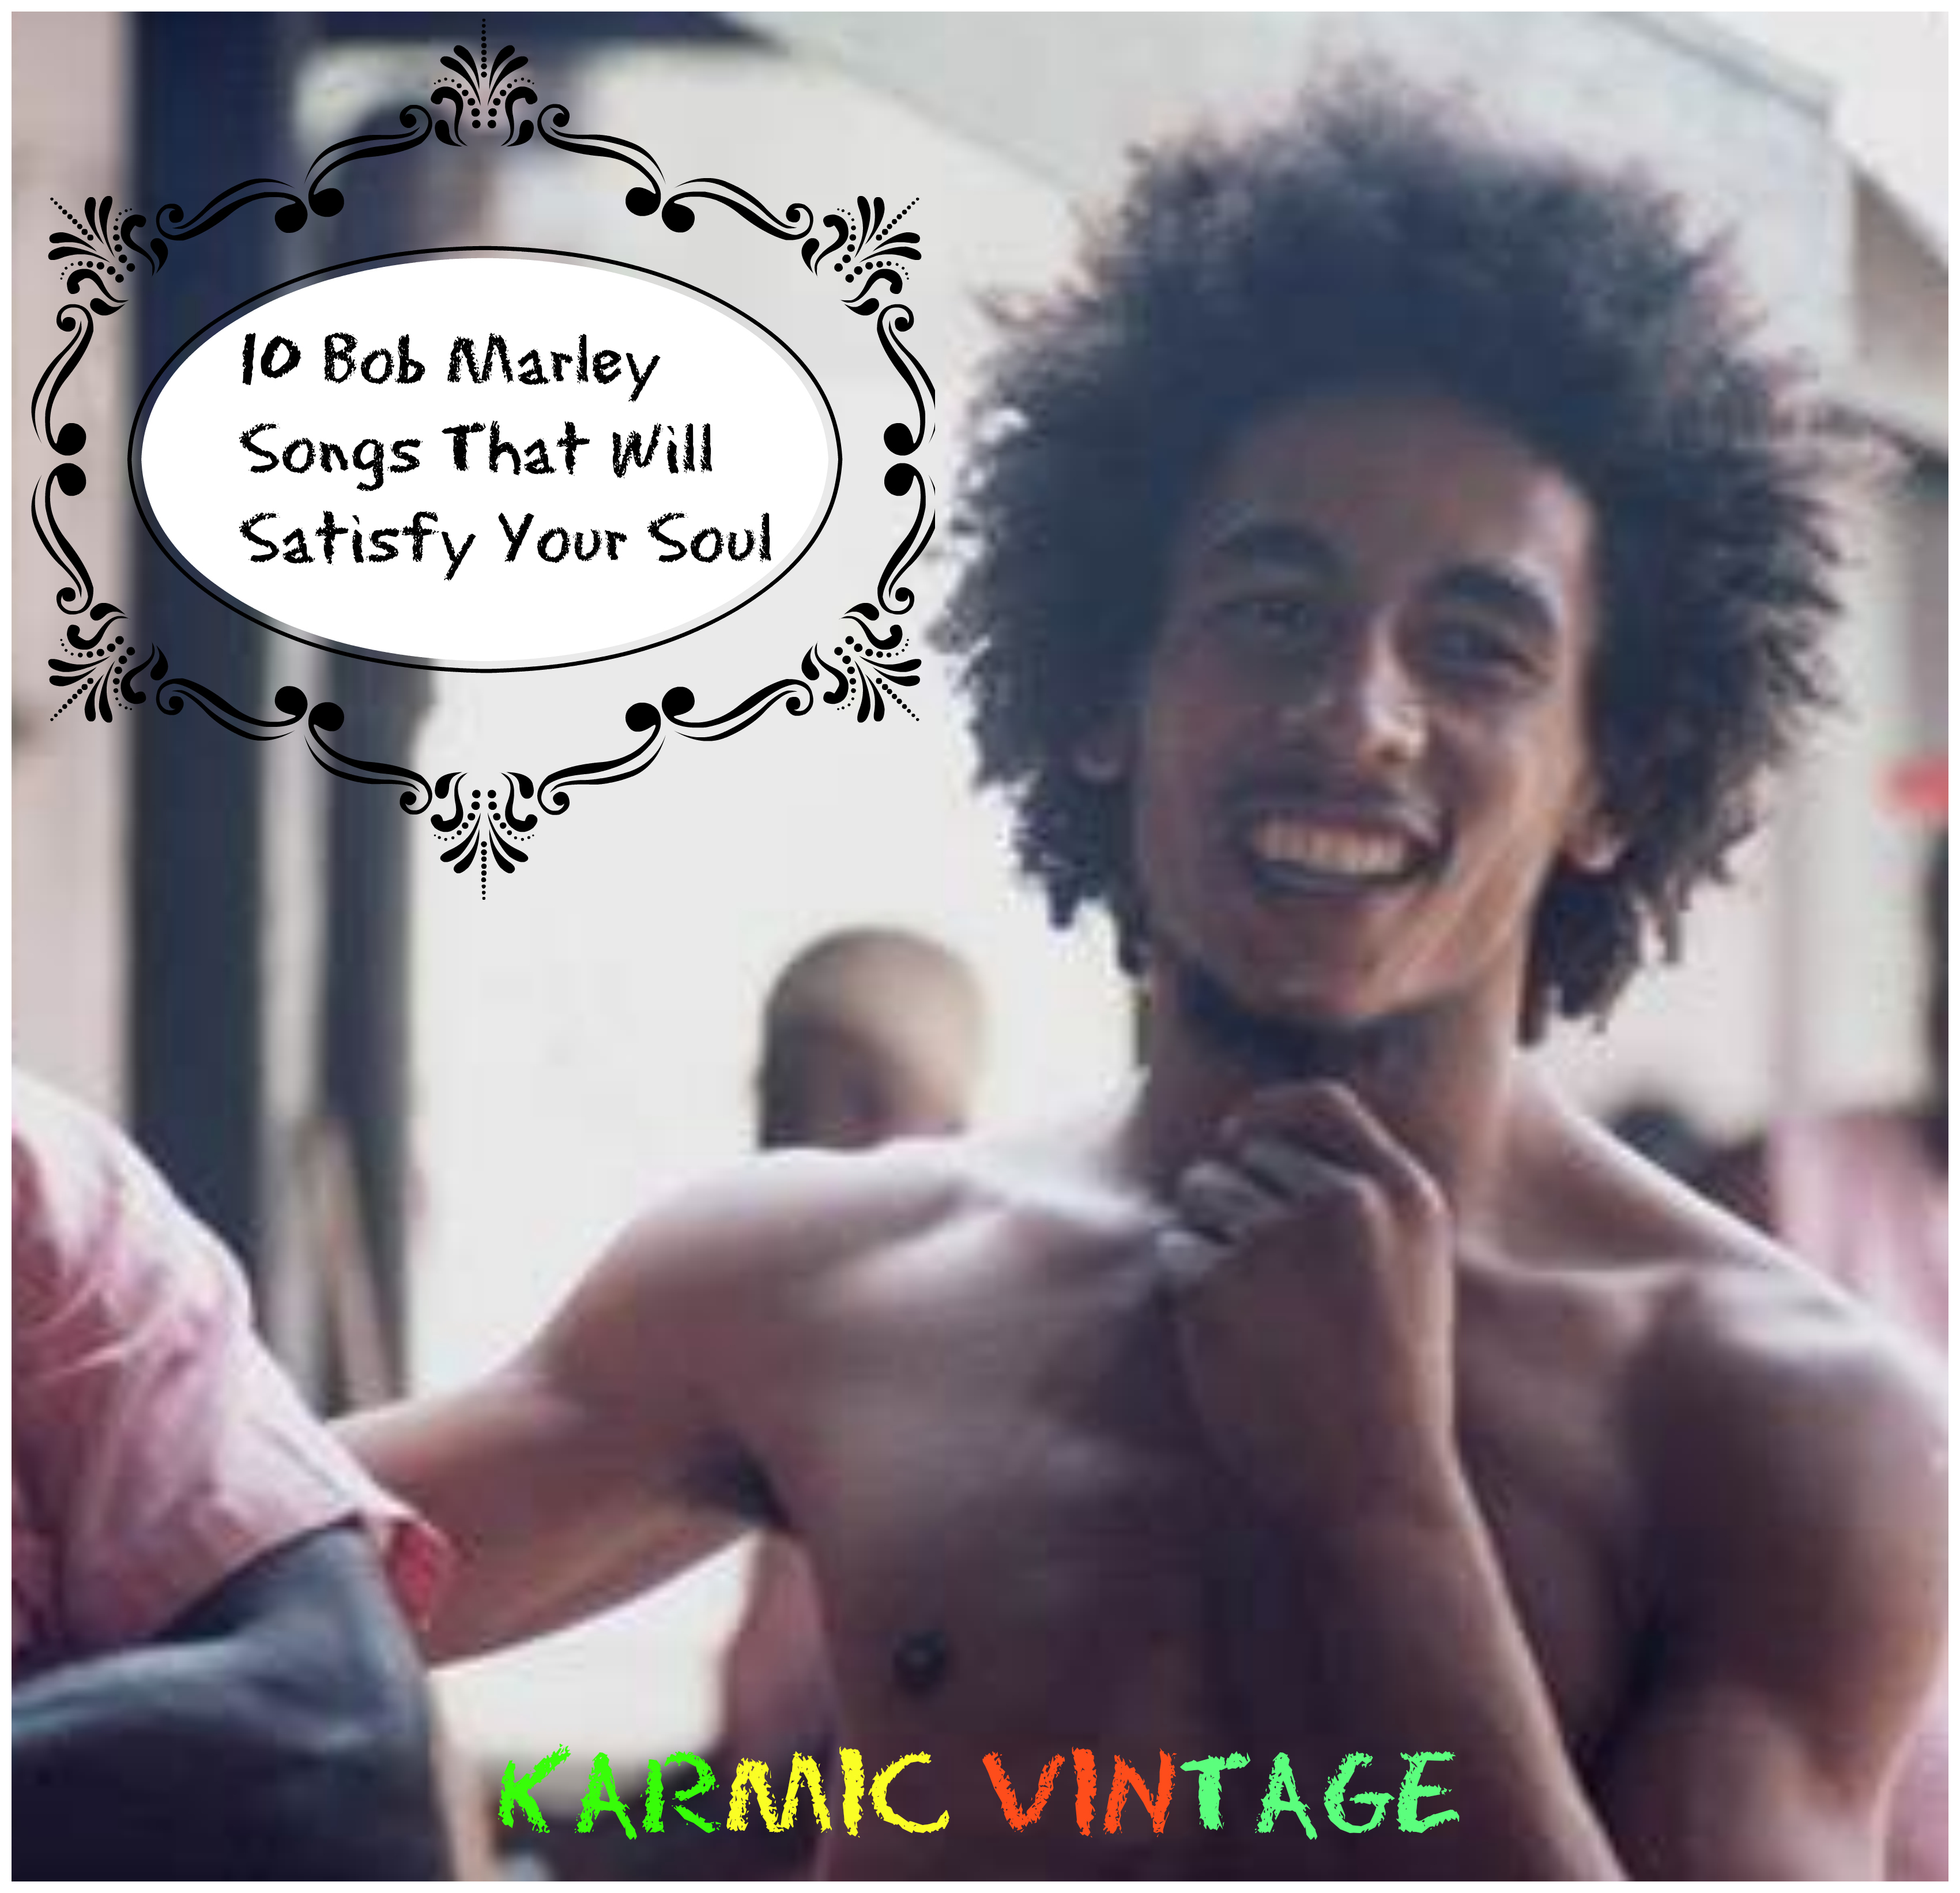 10 Bob Marley and The Wailers Songs That Will Satisfy Your Soul « Karmic Vintage3400 x 3284